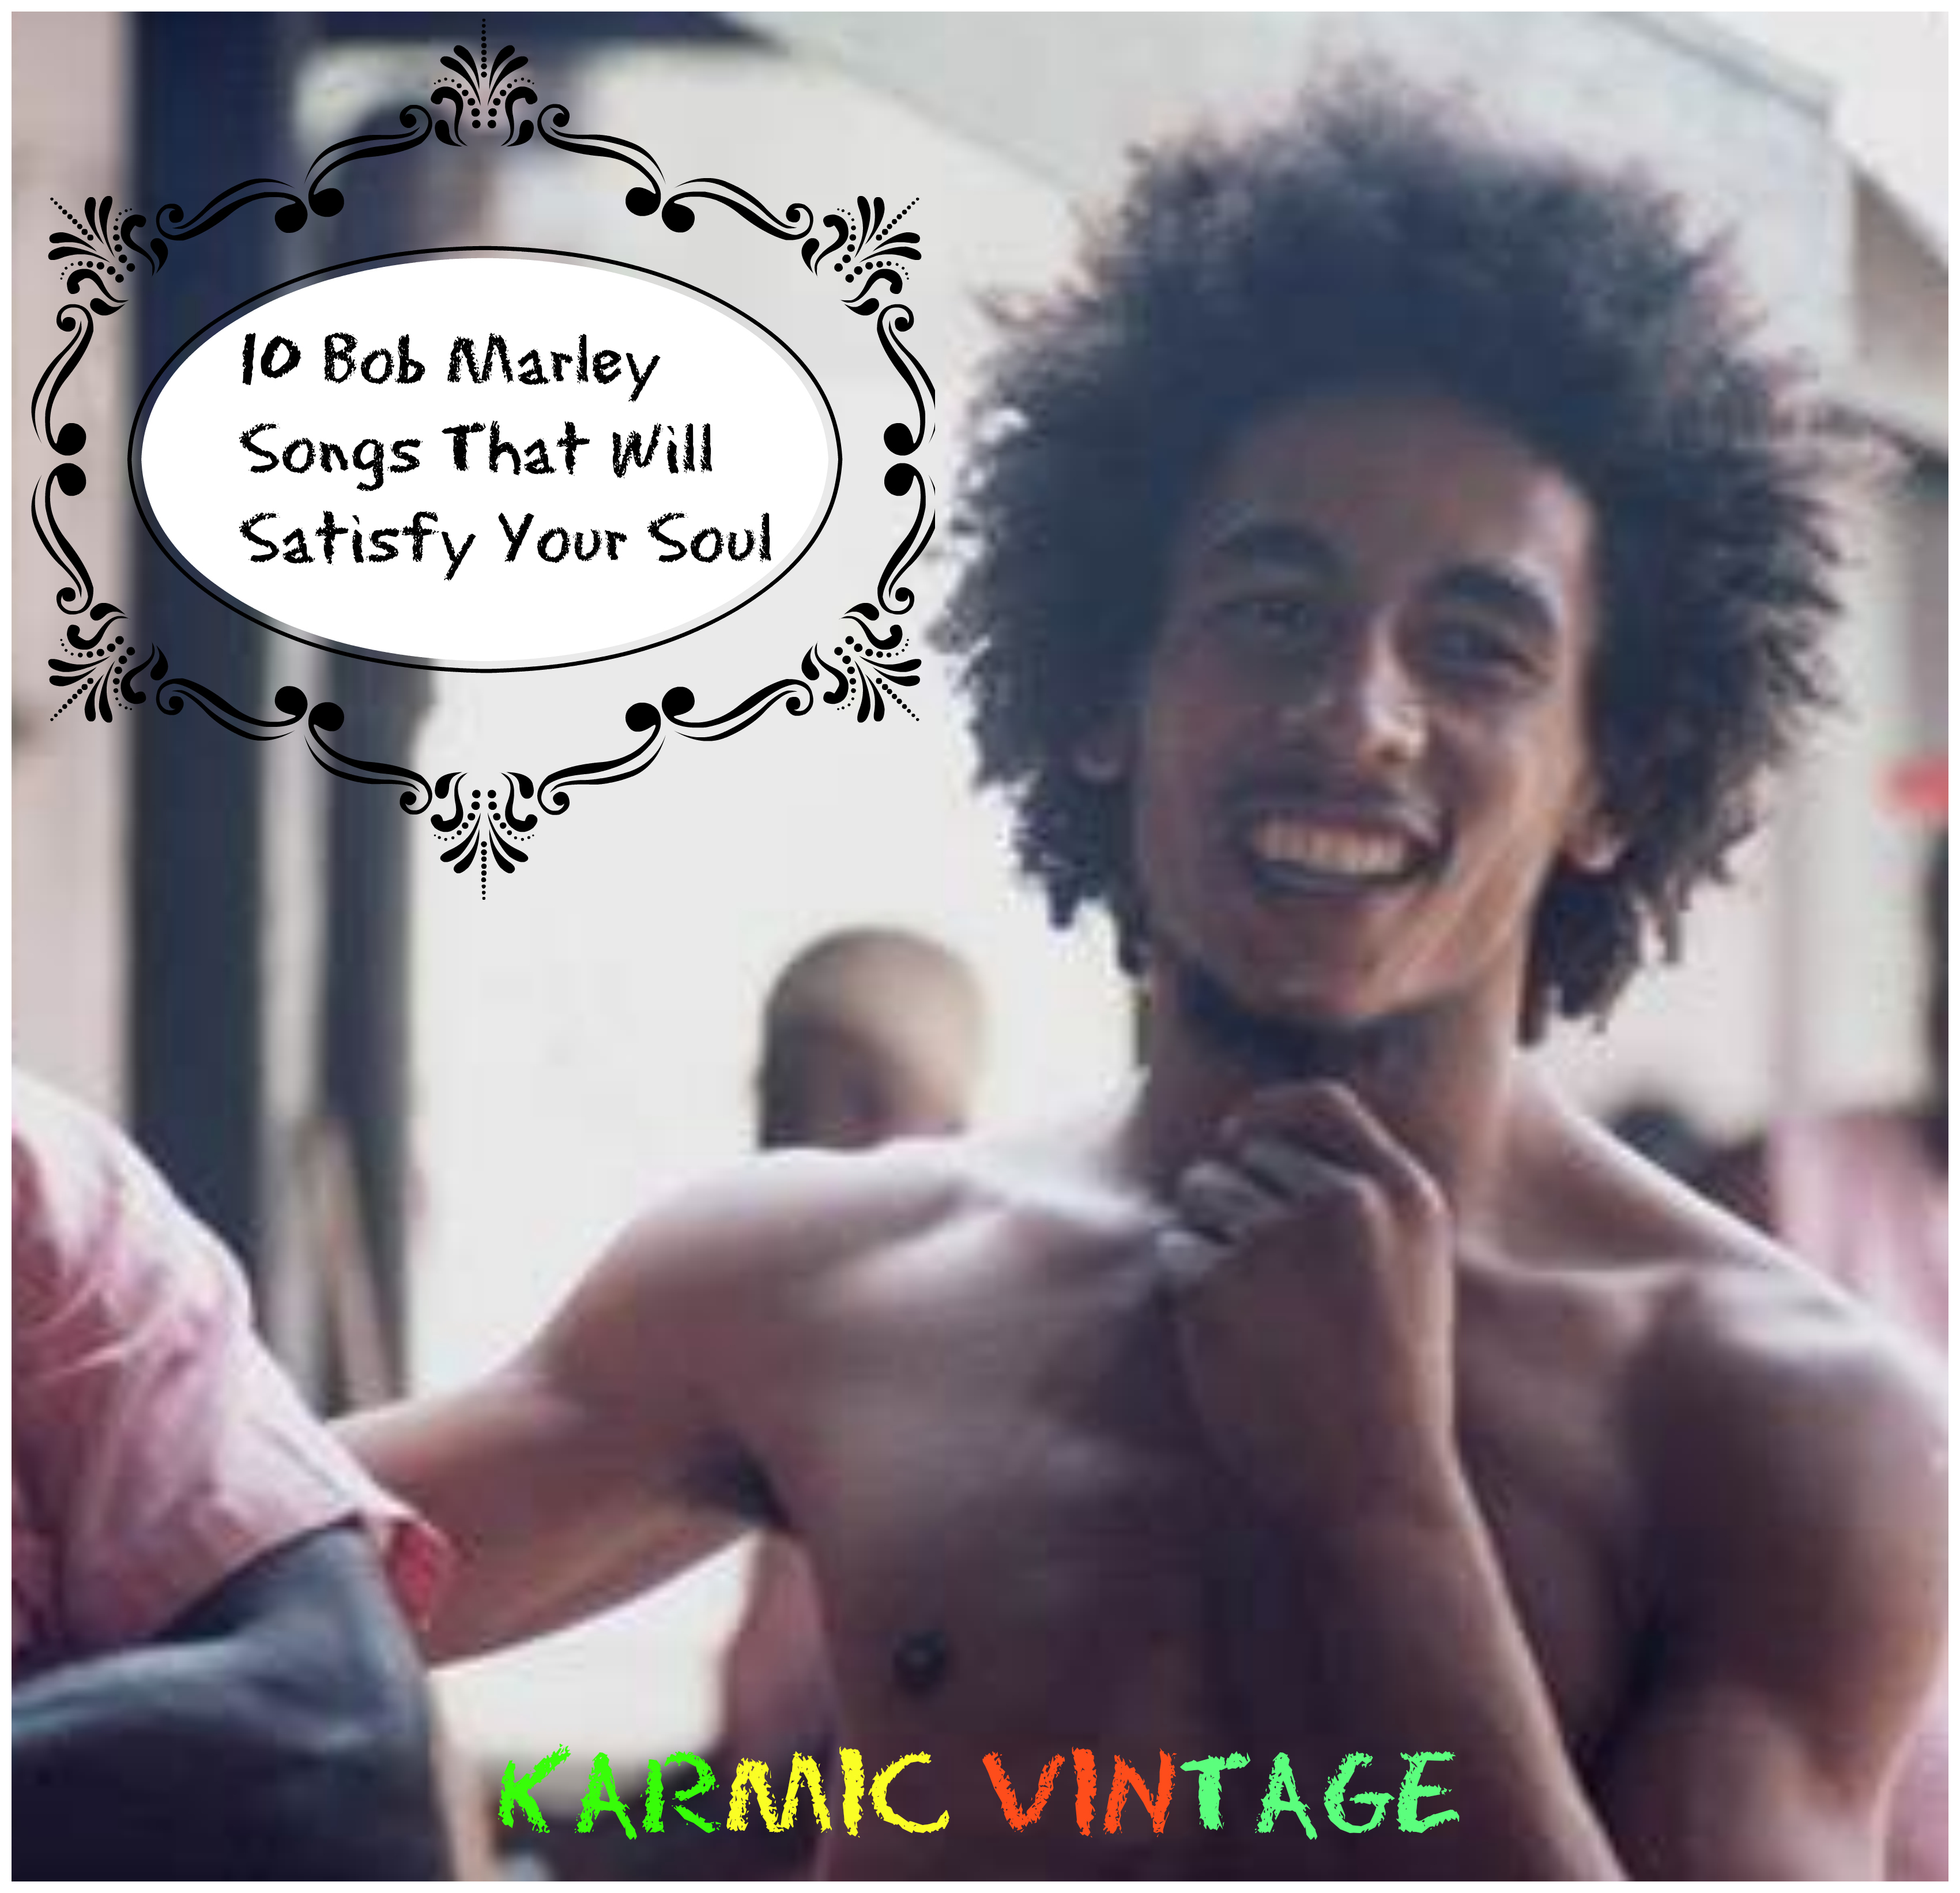 10 Bob Marley and The Wailers Songs That Will Satisfy Your Soul « Karmic Vintage3400 x 3284